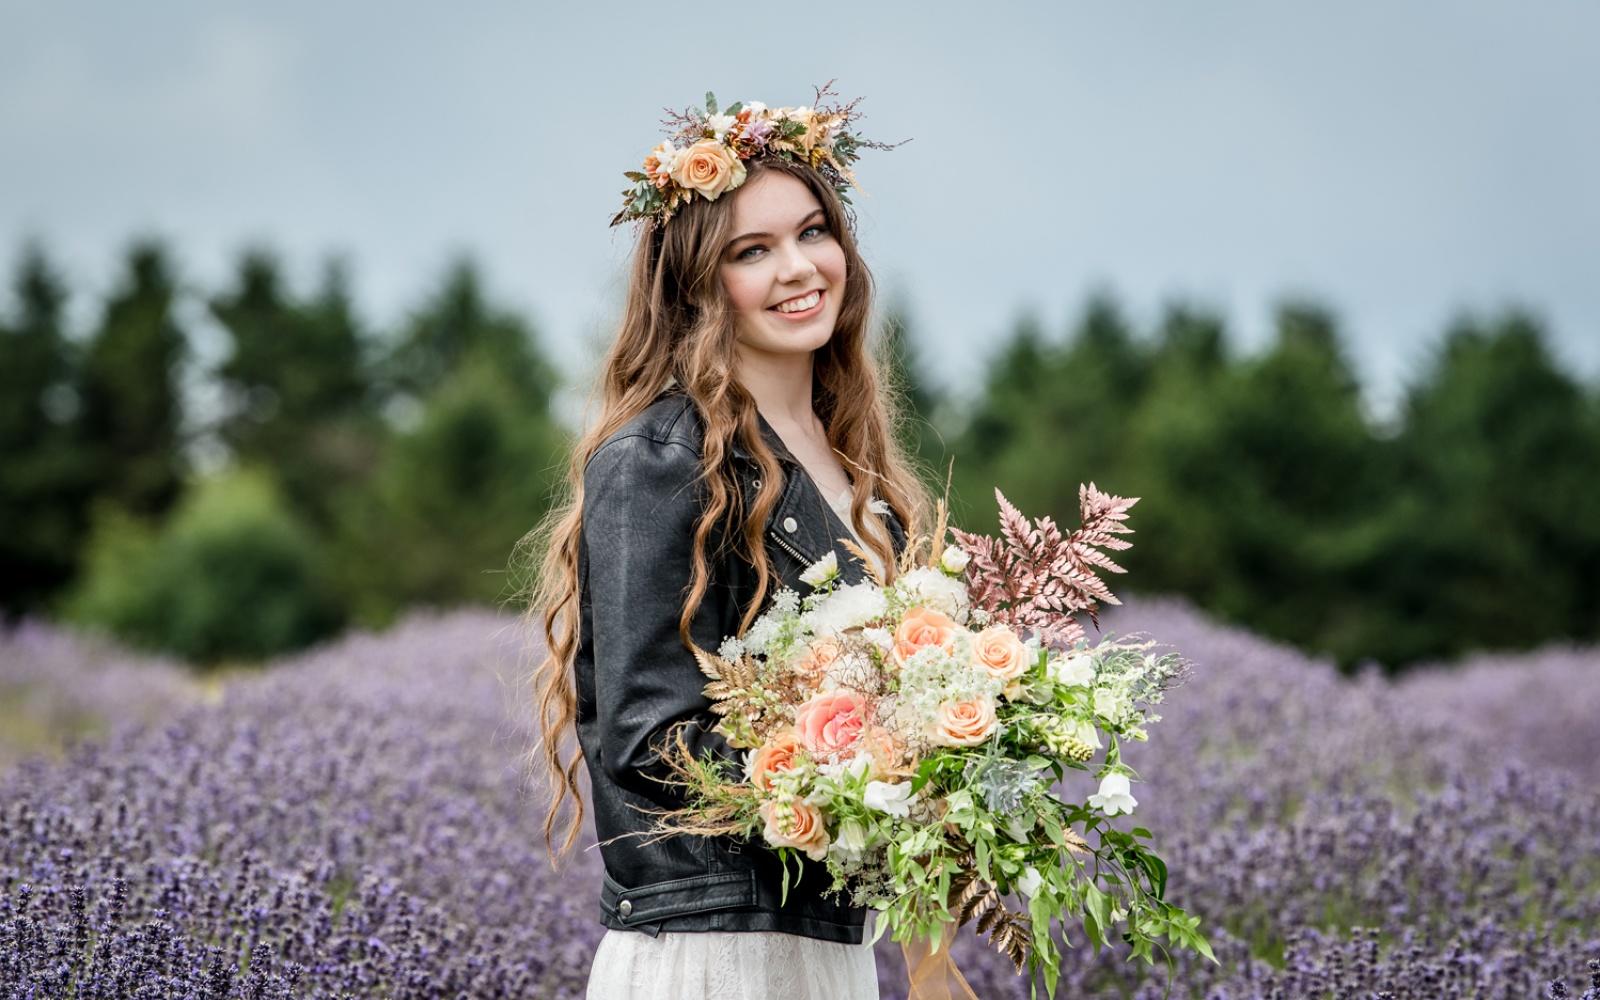 Styled Shoot ideas inspiration Capture Every Moment Make Up by Carissa Wendy House Flowers Willoughby Wolf lavender fields Snowshill black leather jacket bride goals long curls